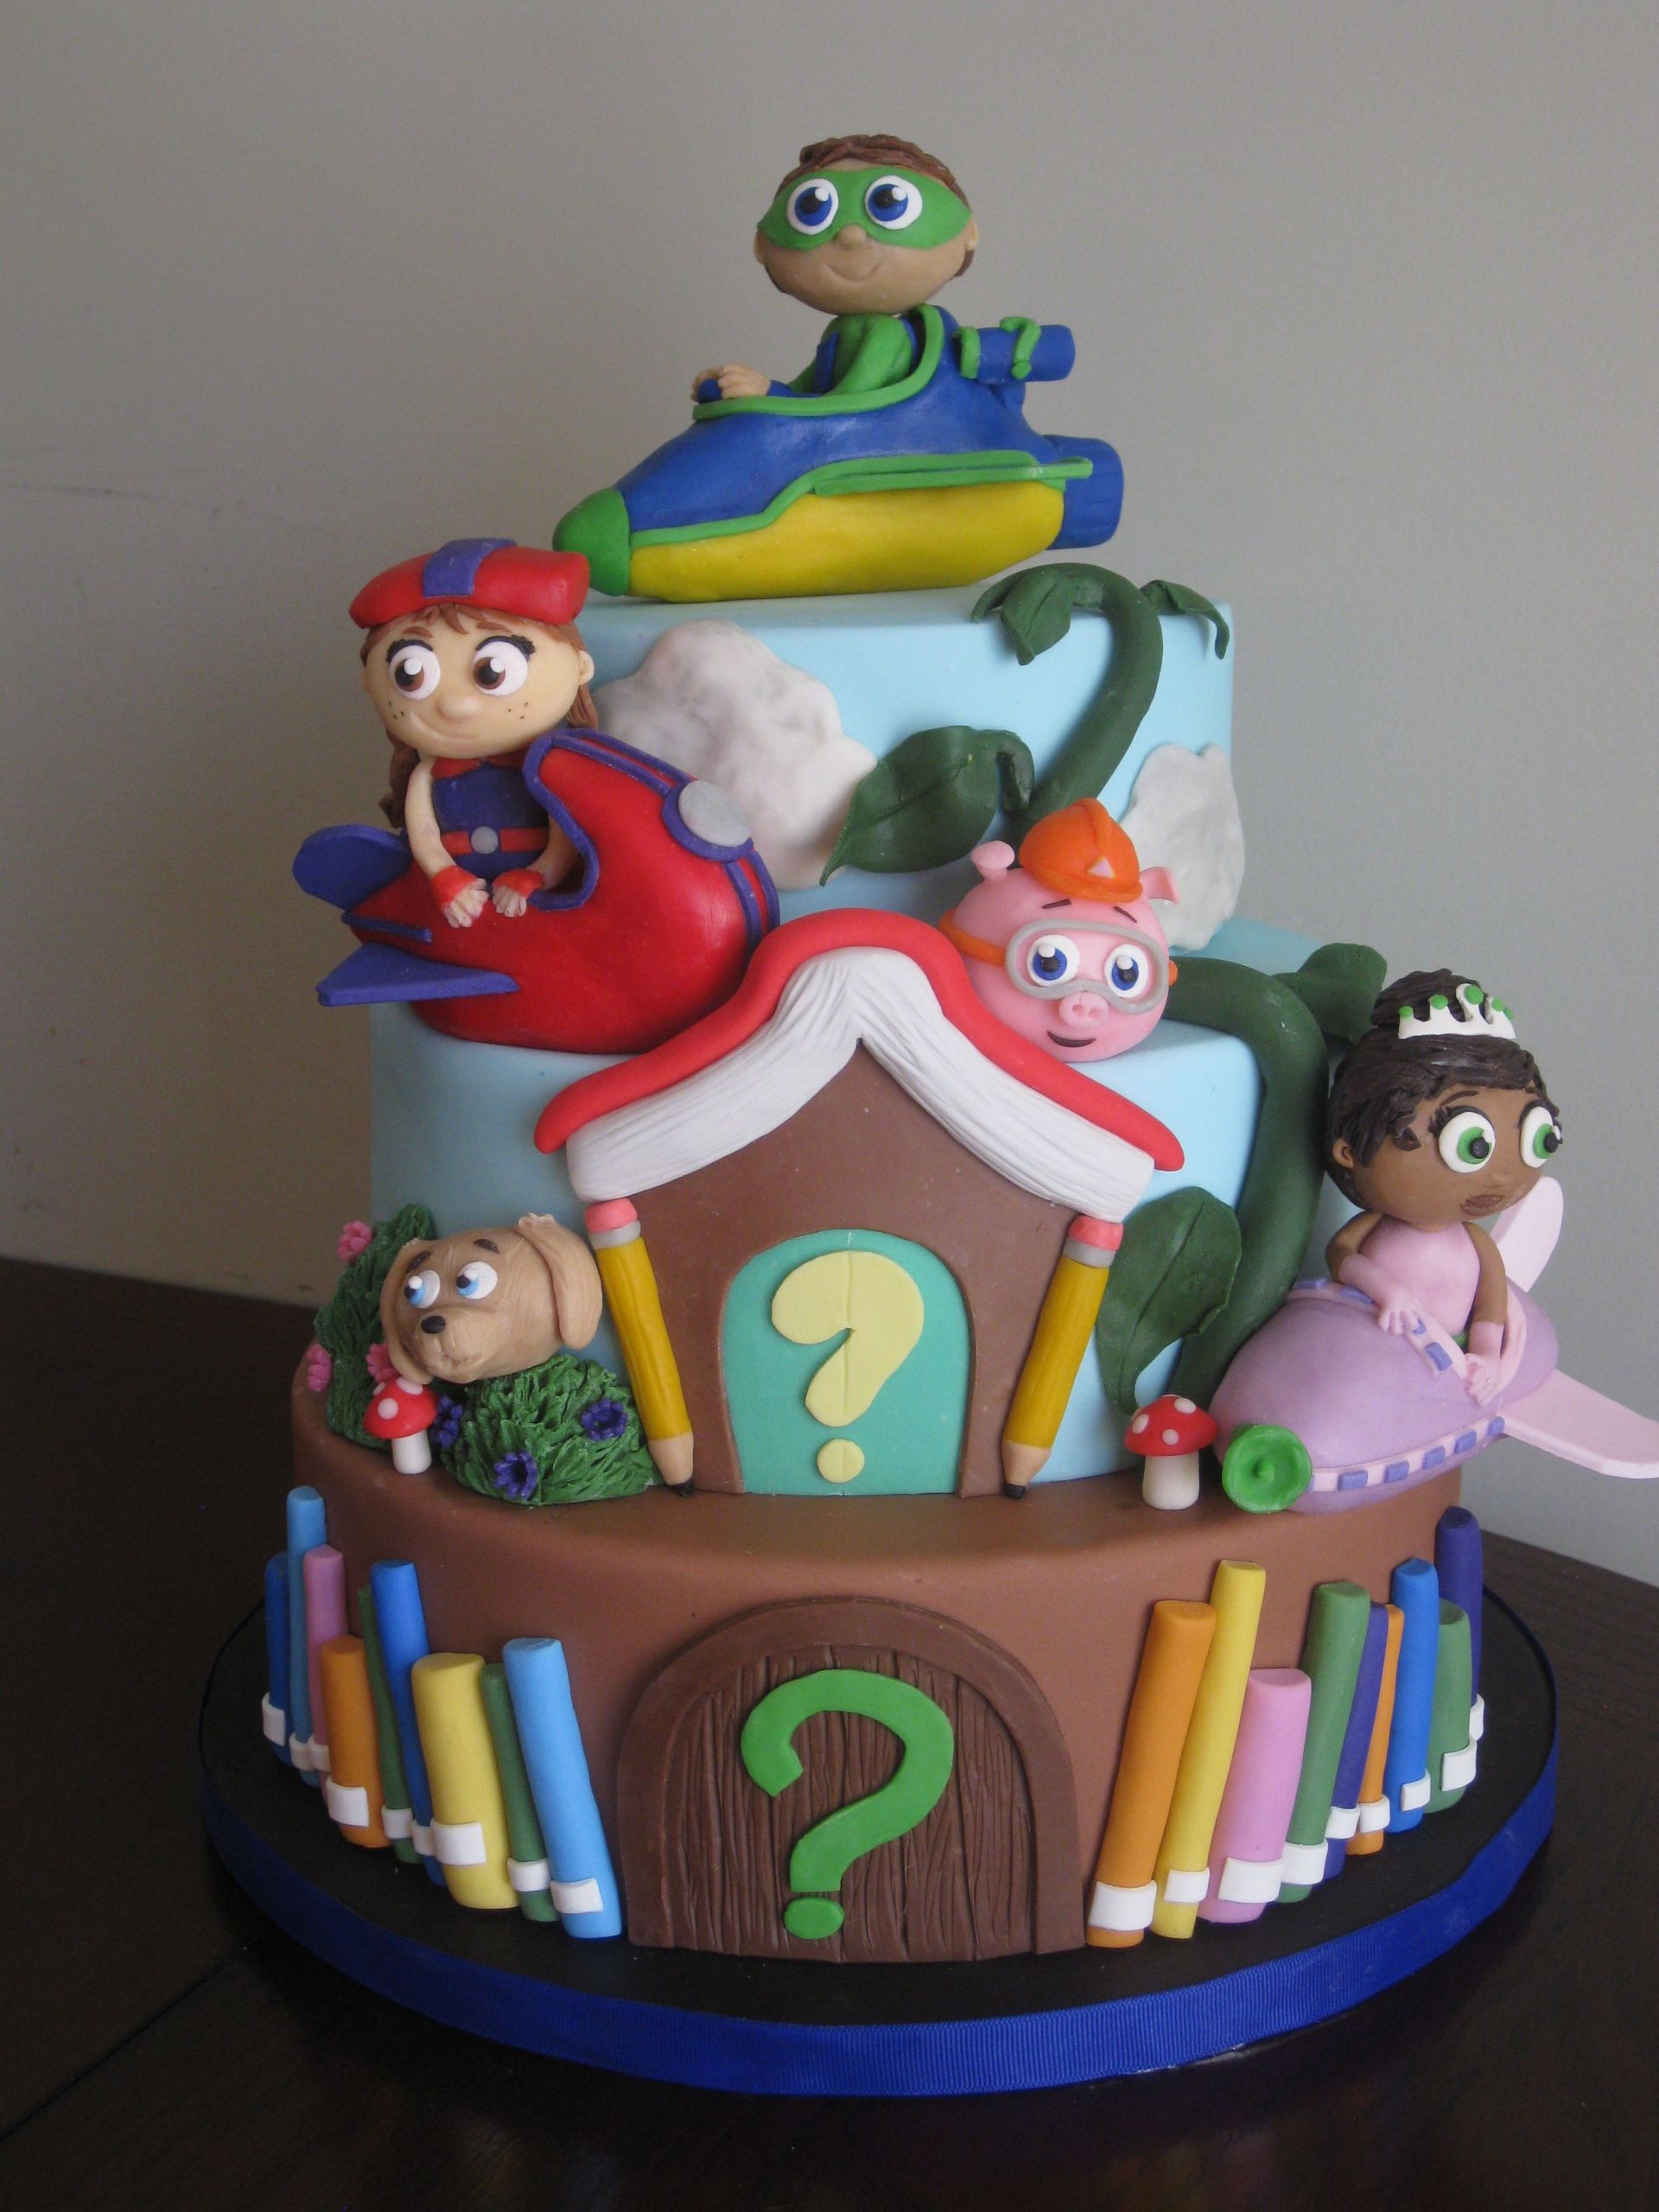 Super Why Birthday Decorations
 Super Why themed birthday cake for my daughter s 5th